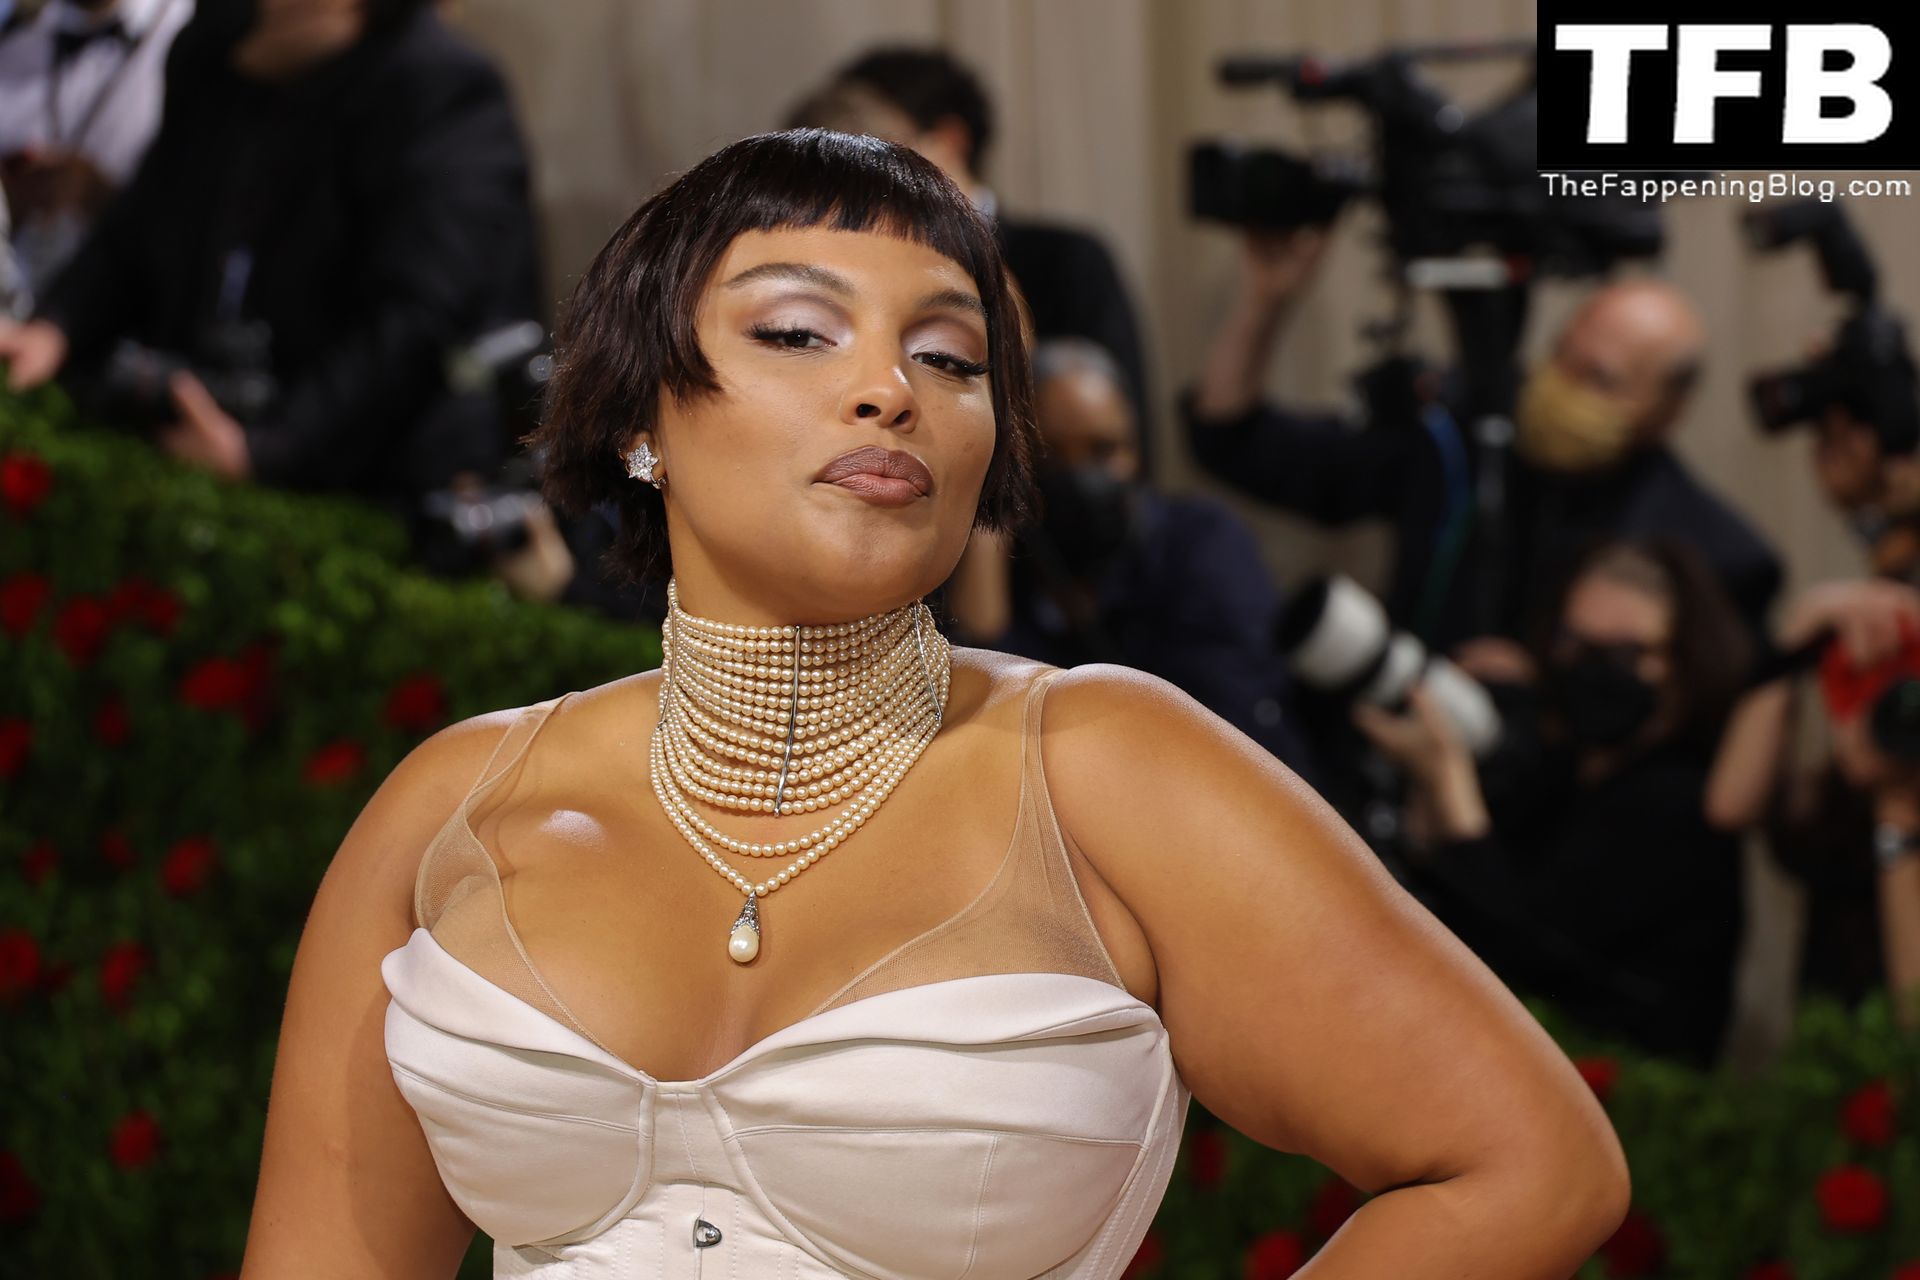 Paloma Elsesser Shows Off Her Big Boobs at The 2022 Met Gala in NYC (15